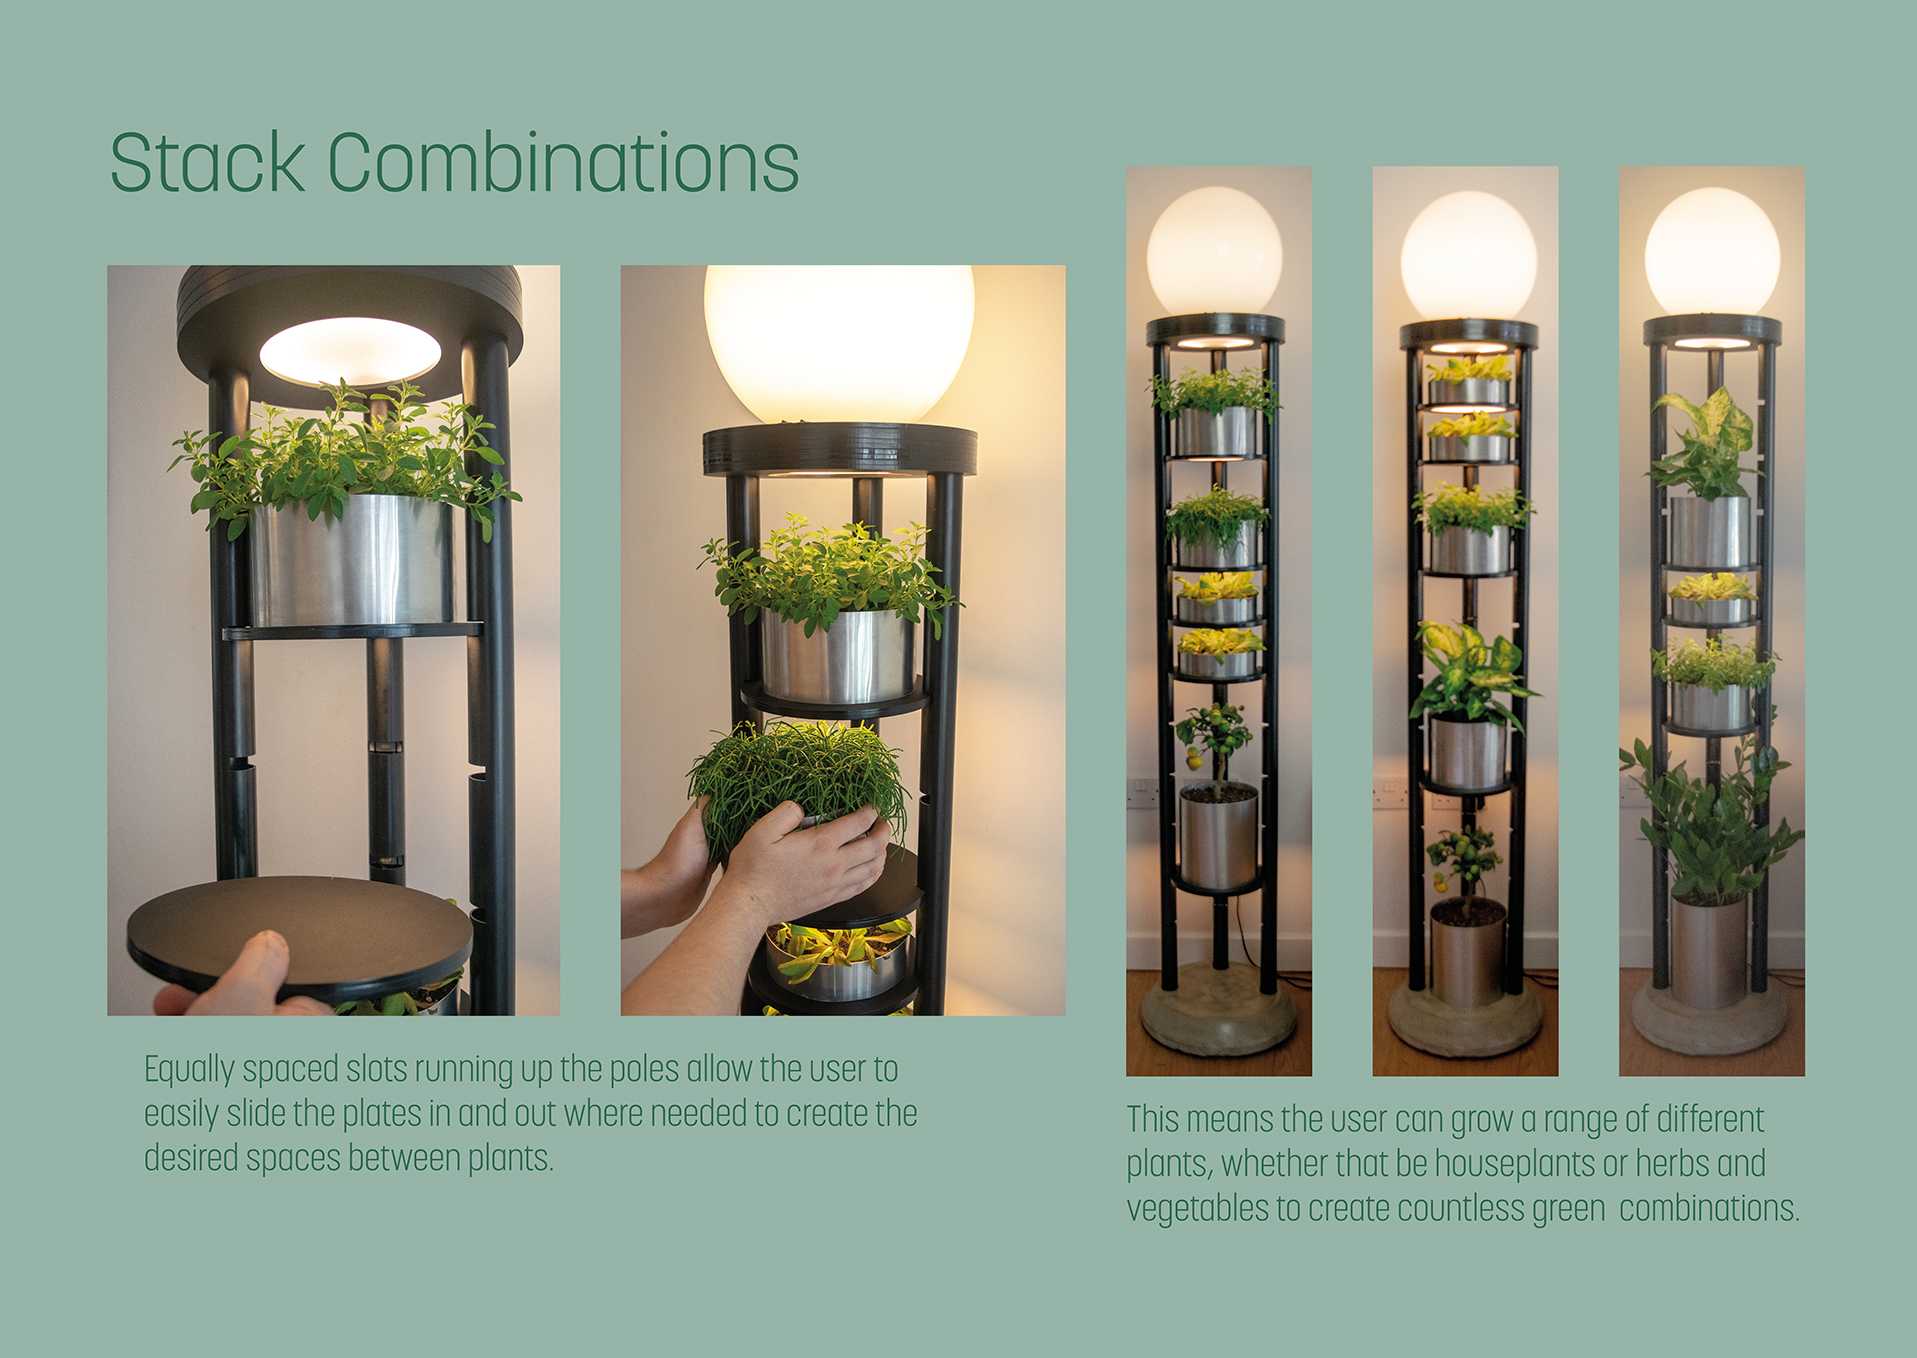 Explore your STACK by changing the different combinations with a range of different-sized plants. The plate and slot design make it easy for the user to slide them in and out to create the different-sized grow areas in STACK's vertical garden. 